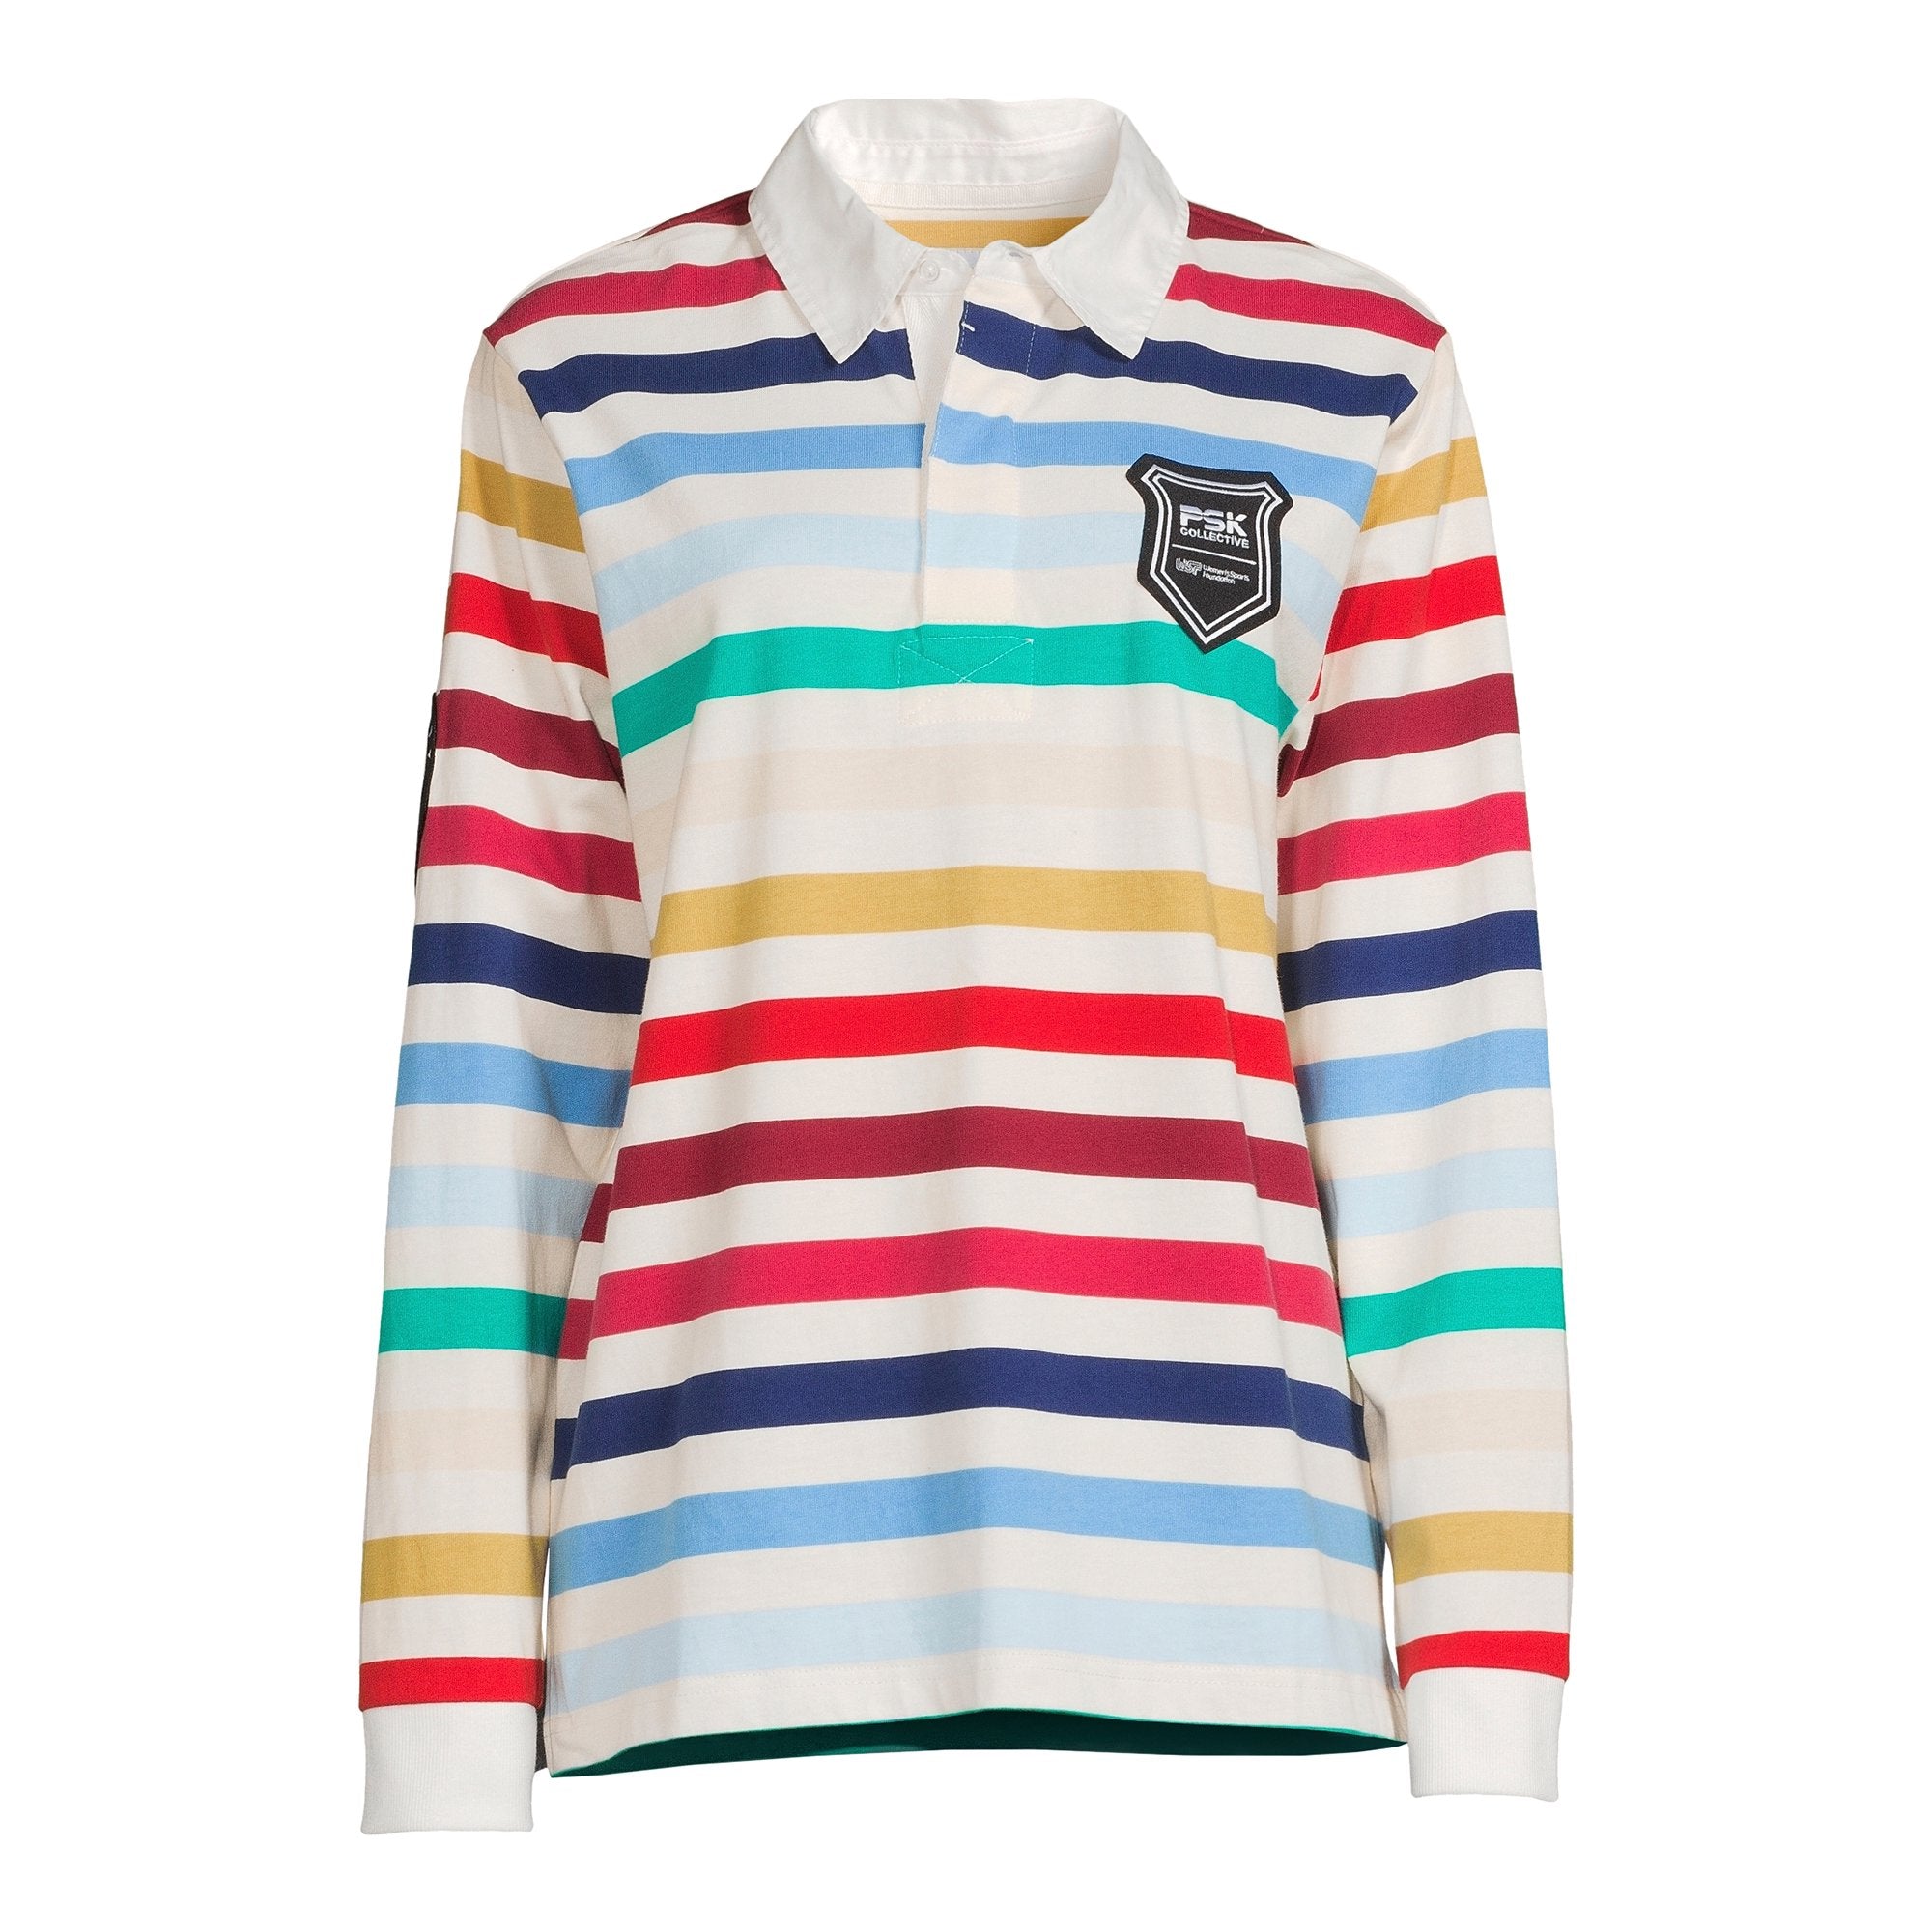 PSK Collective “Equal Pay” Rugby Shirt